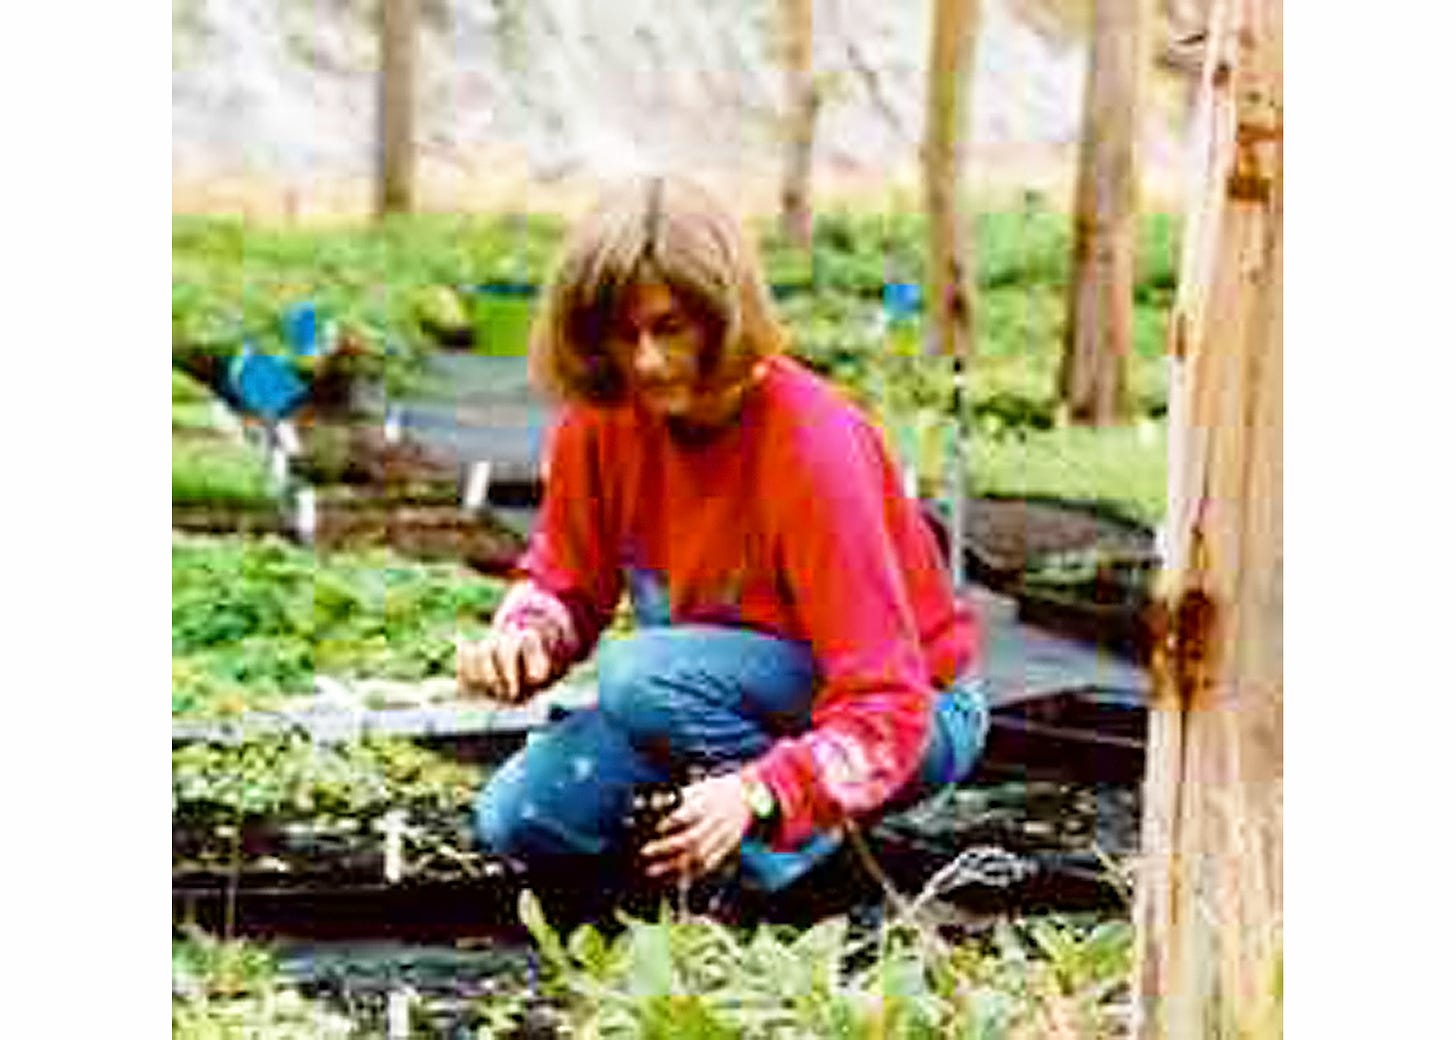 Woman crouches on ground amid many flats of plants, dirt on her fingers